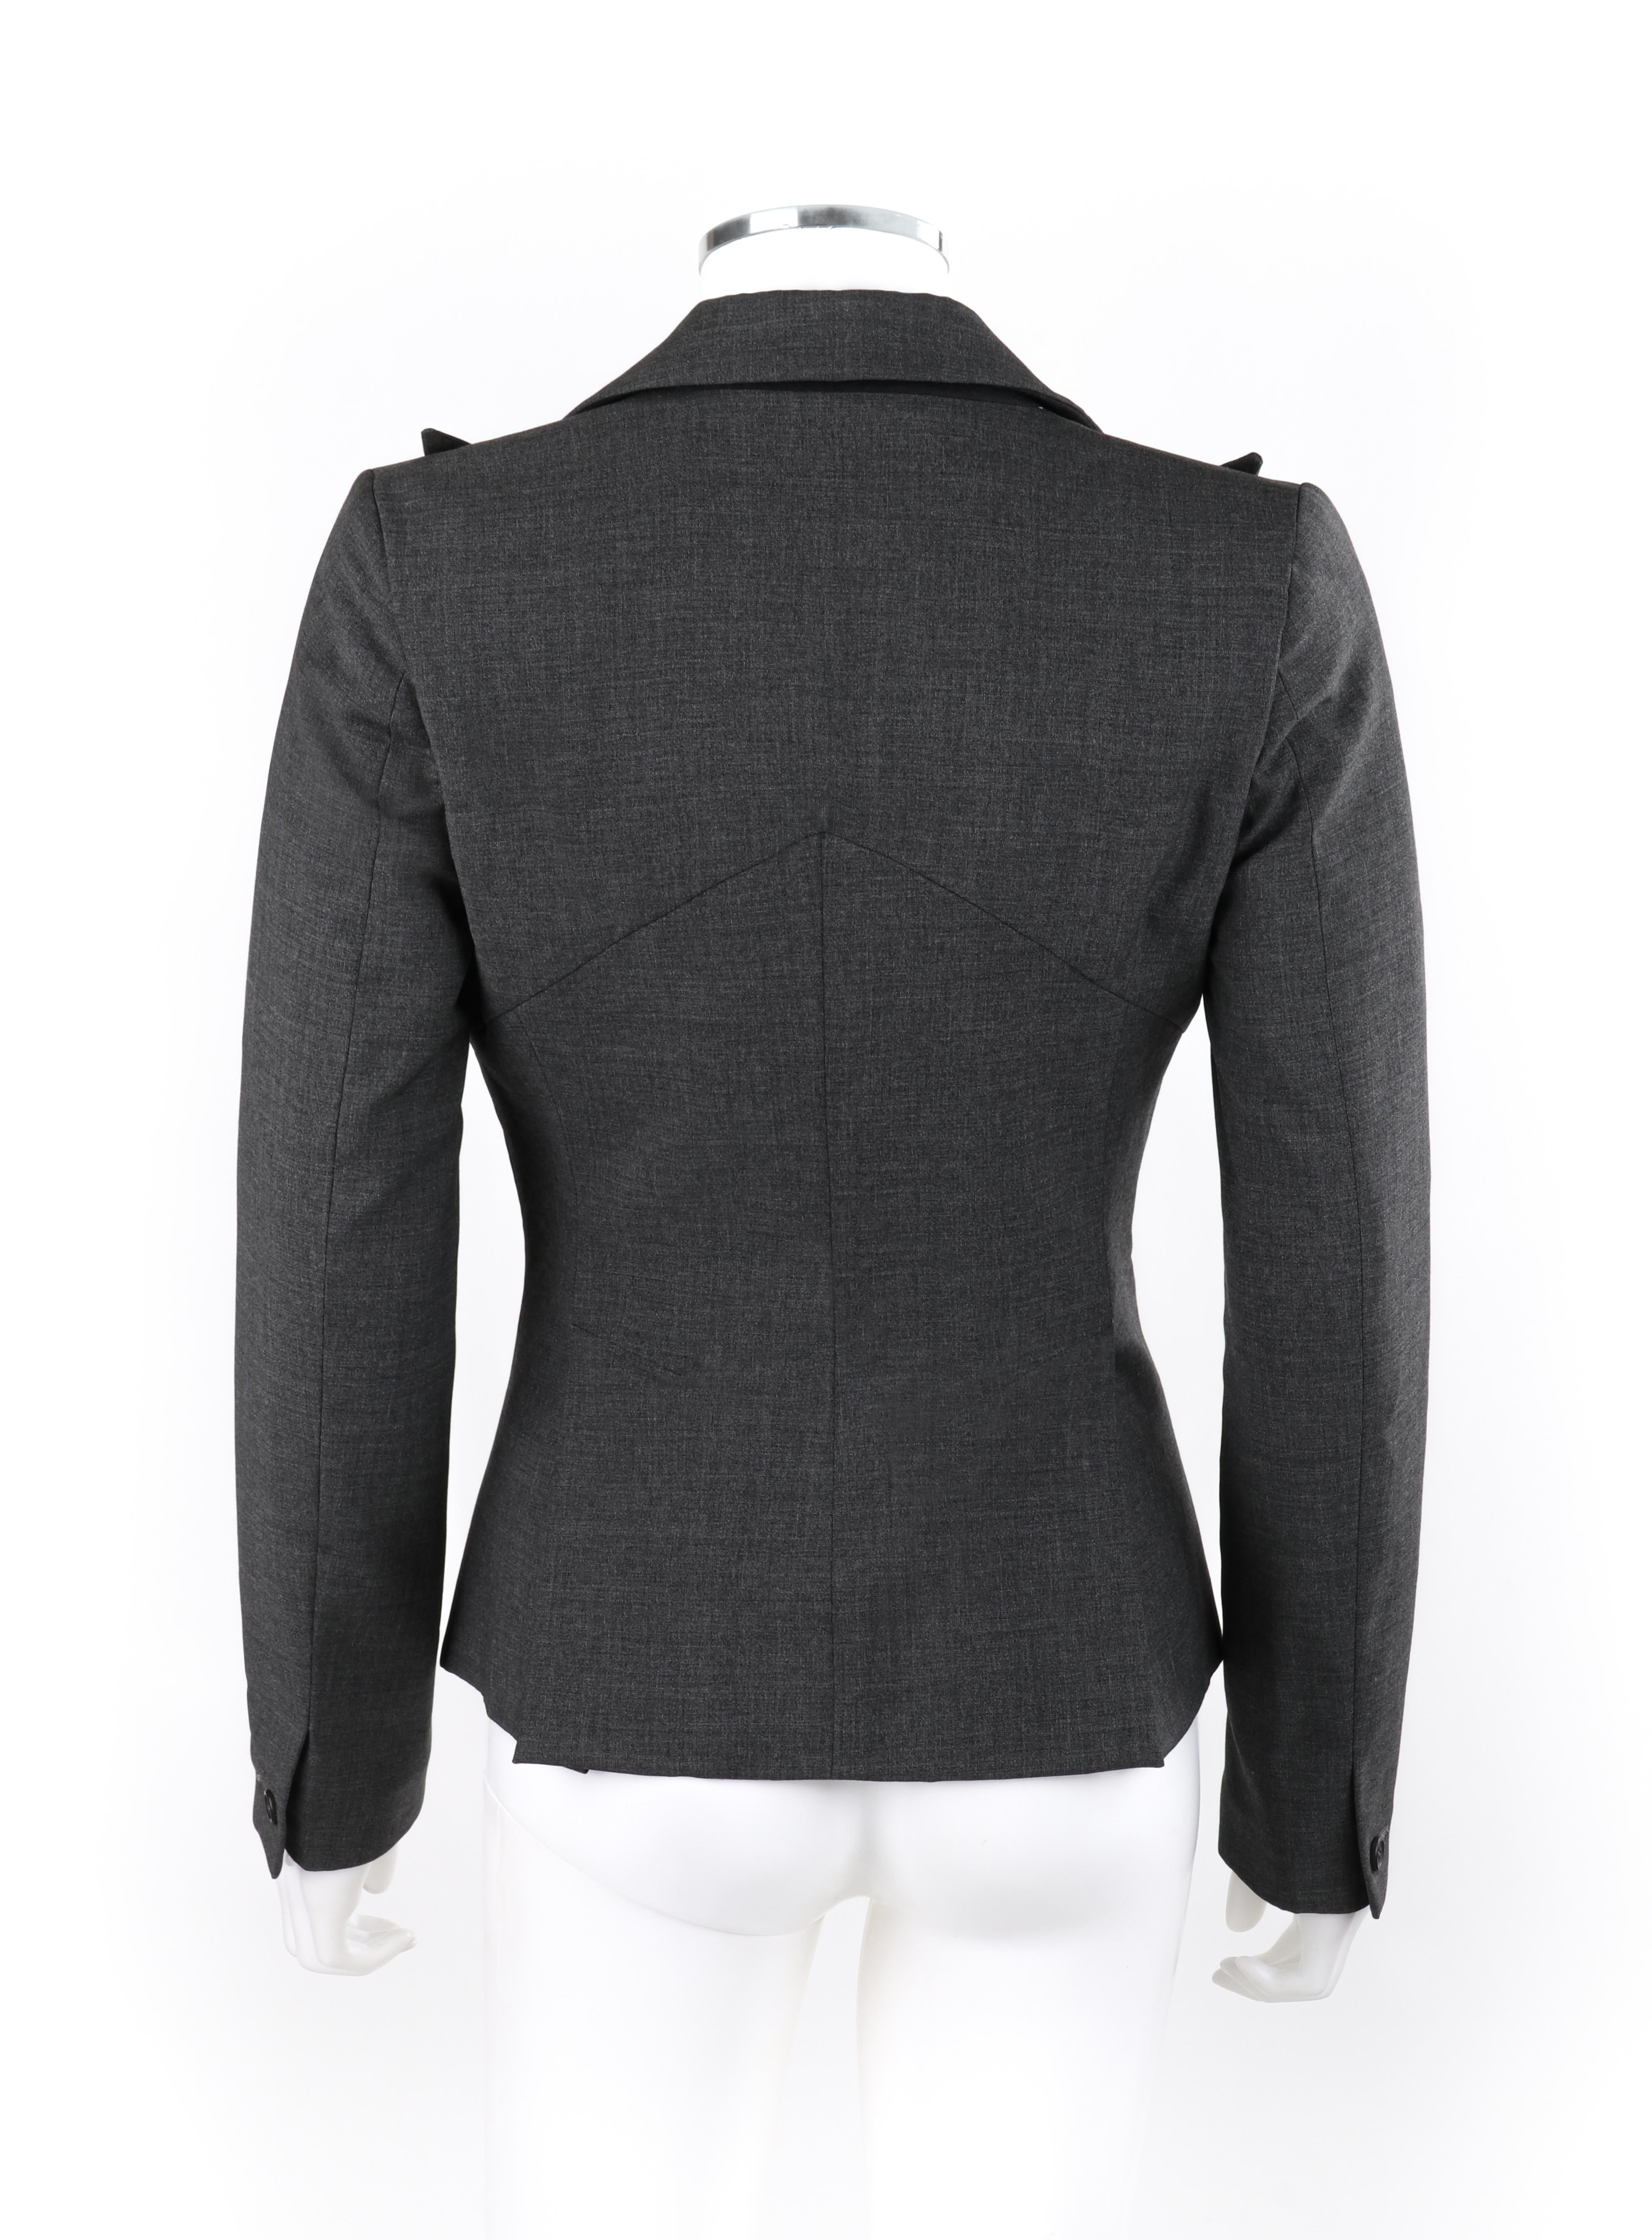 ALEXANDER McQUEEN S/S 1996 “The Hunger” Gray Tailored Long Sleeve Blazer Jacket In Good Condition For Sale In Thiensville, WI